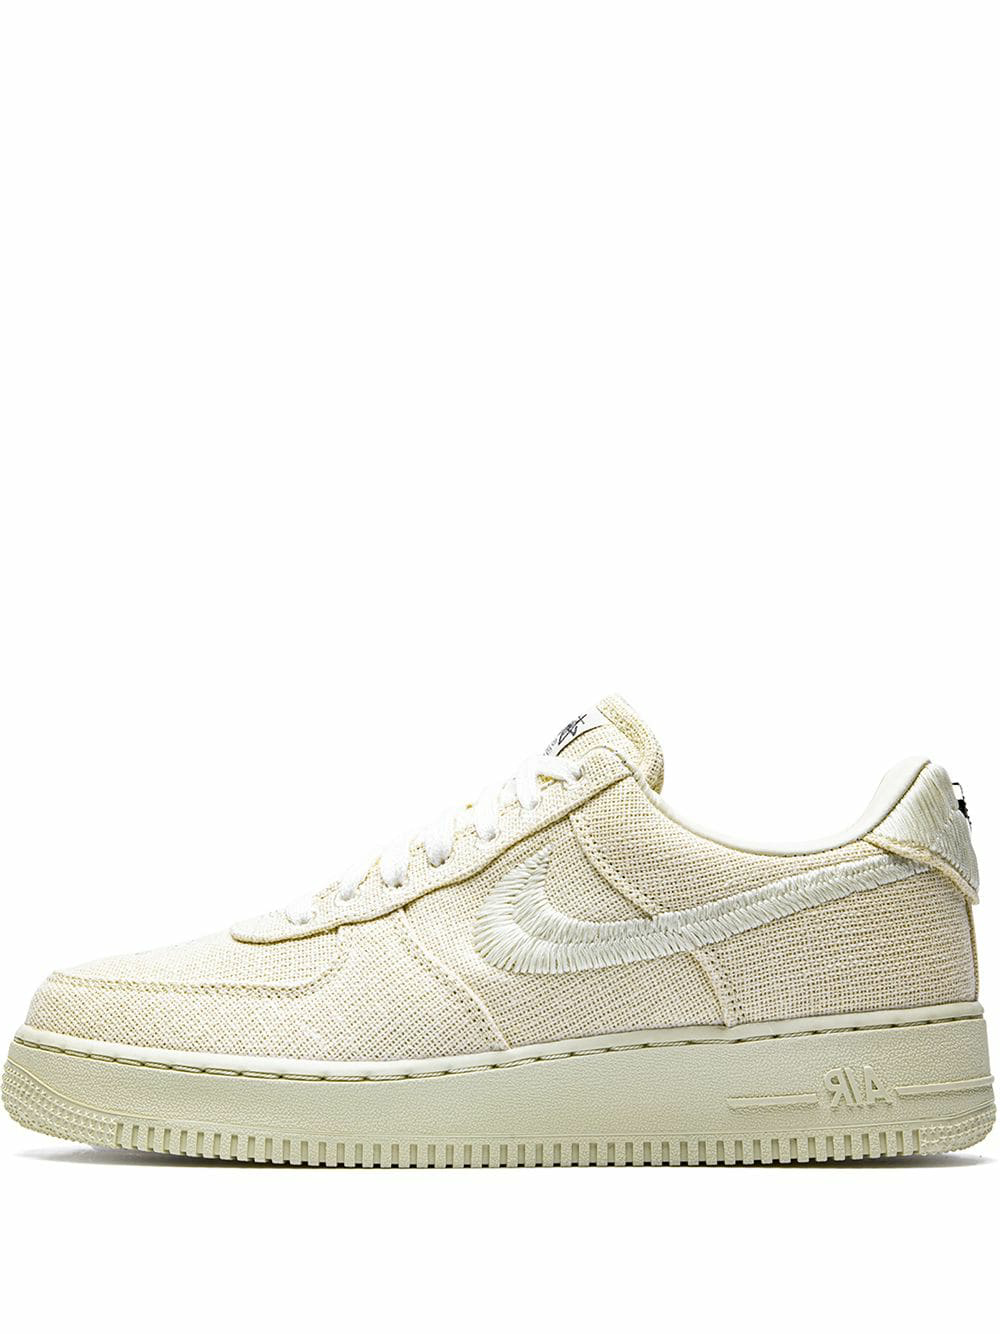 NIKE AIR FORCE 1 - STUSSY '' FOSSIL ''